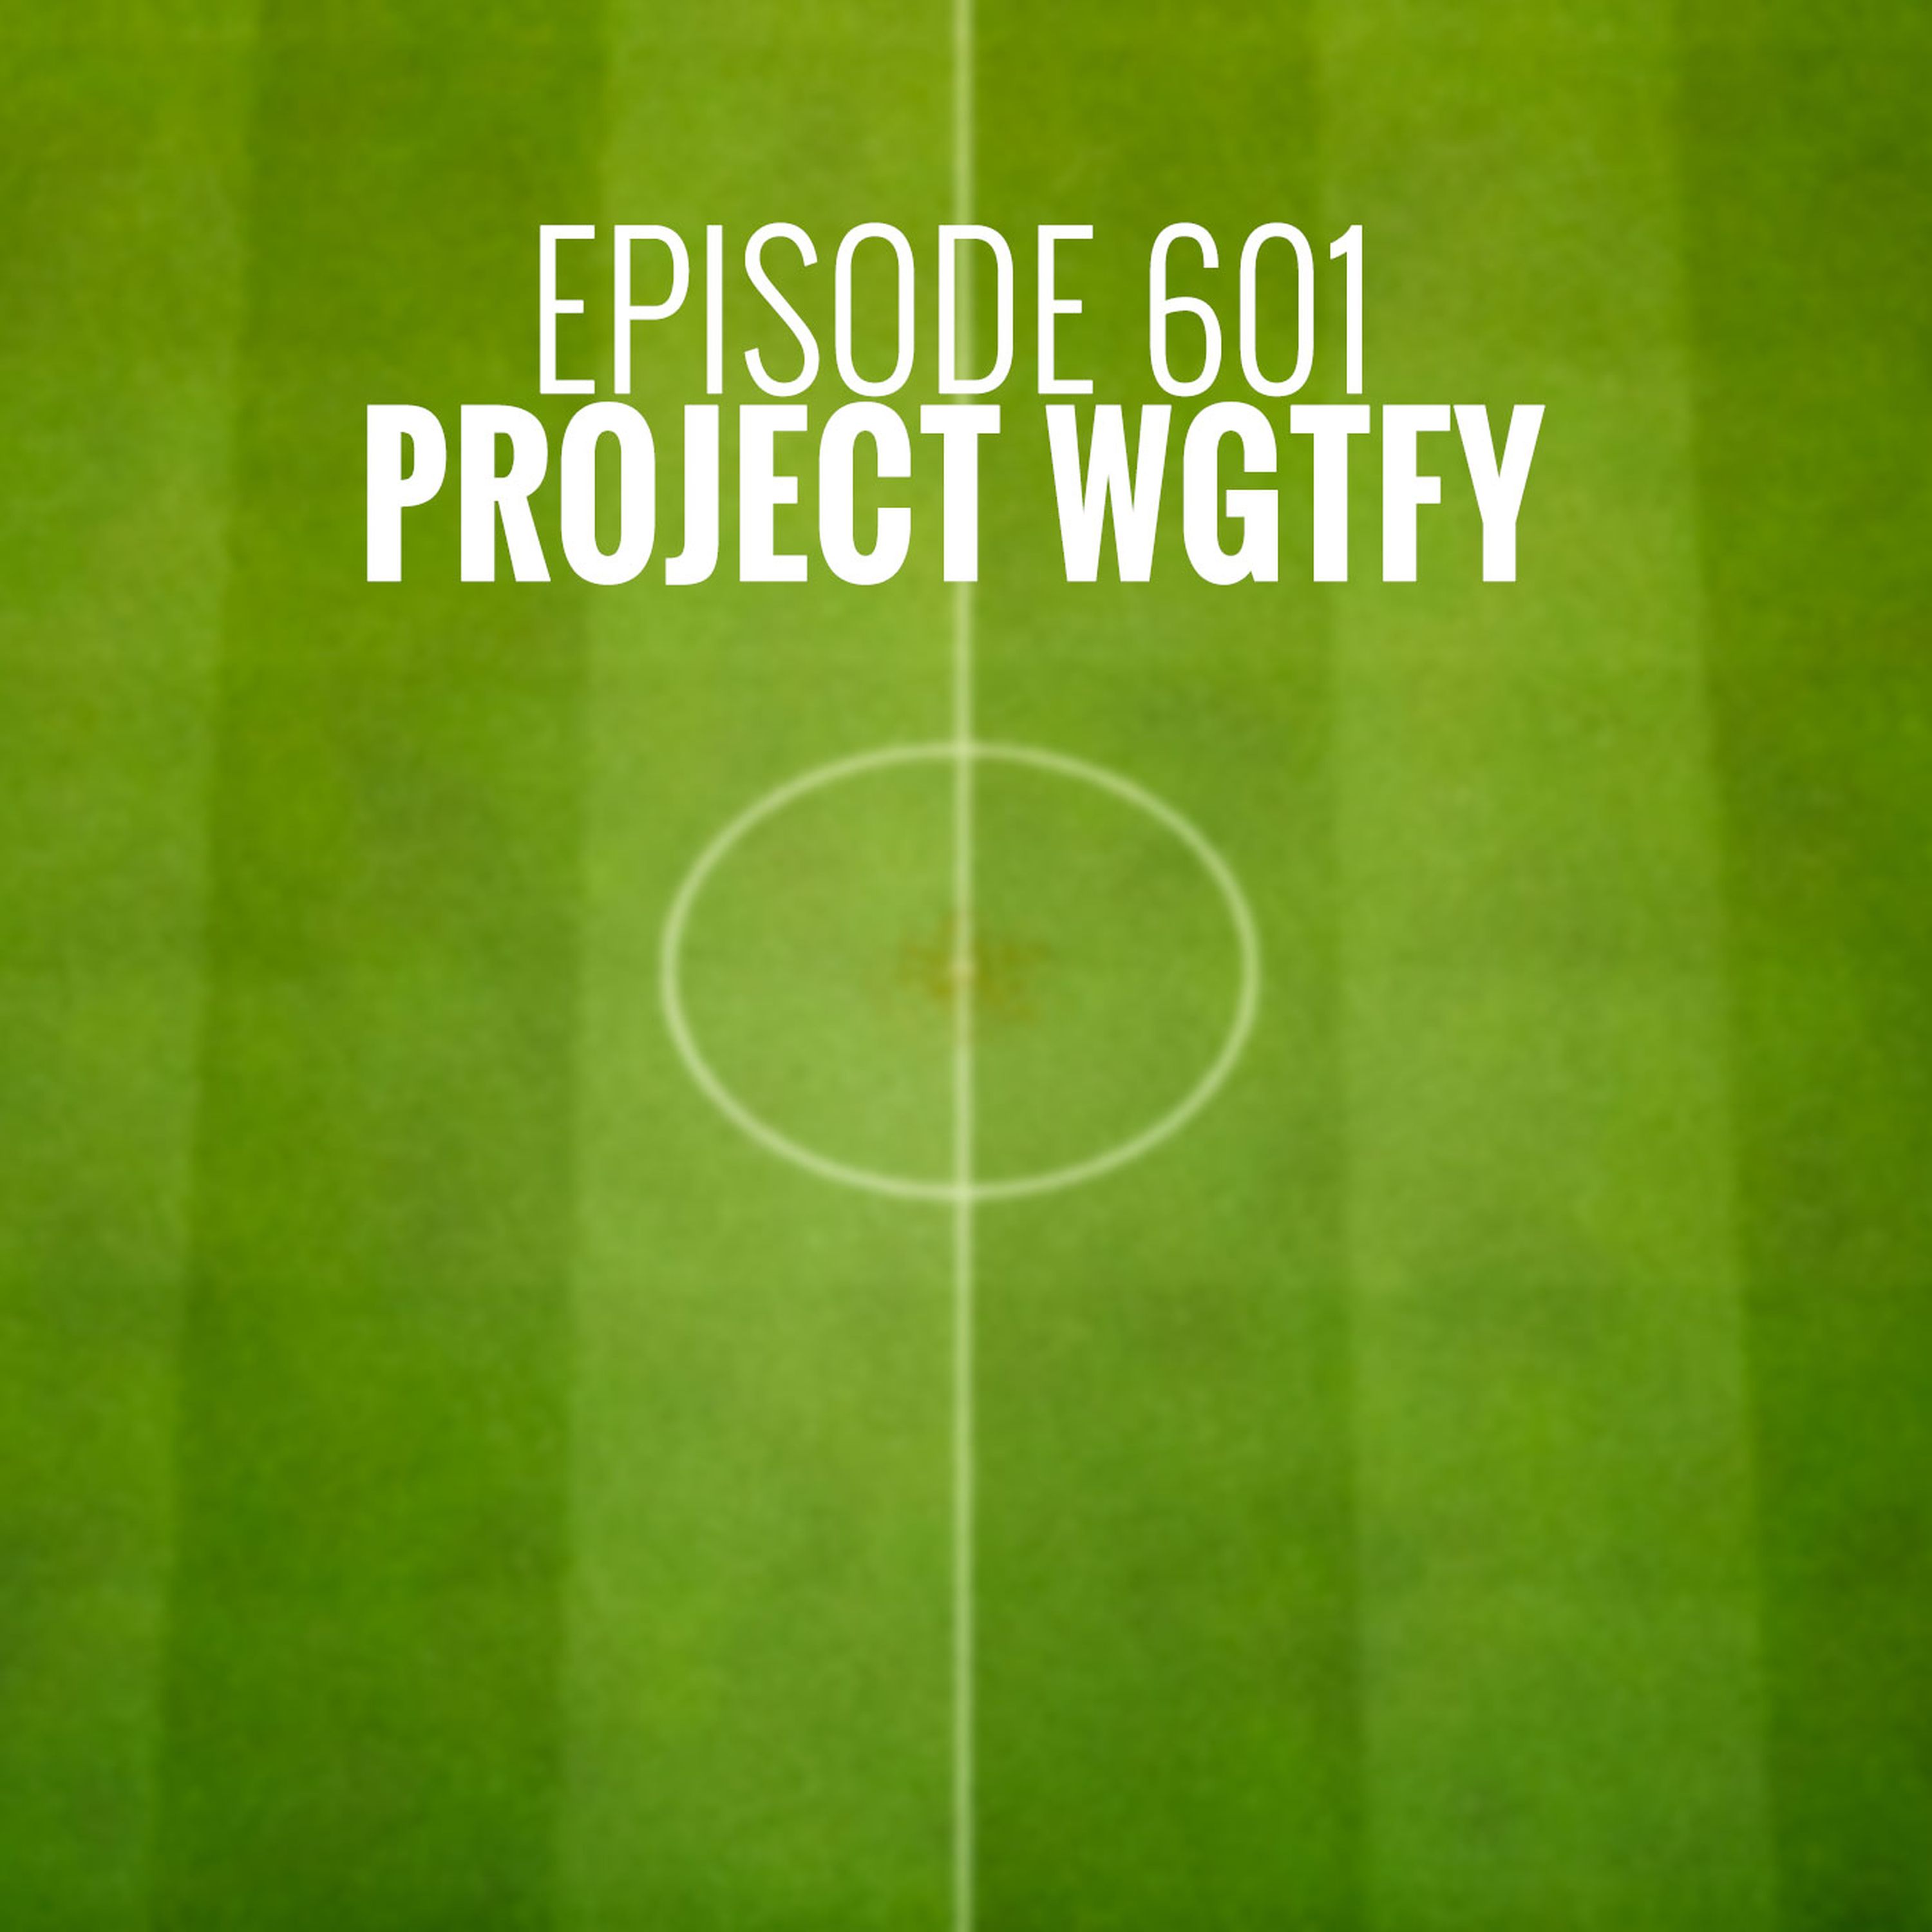 Episode 601 - Project WGTFY